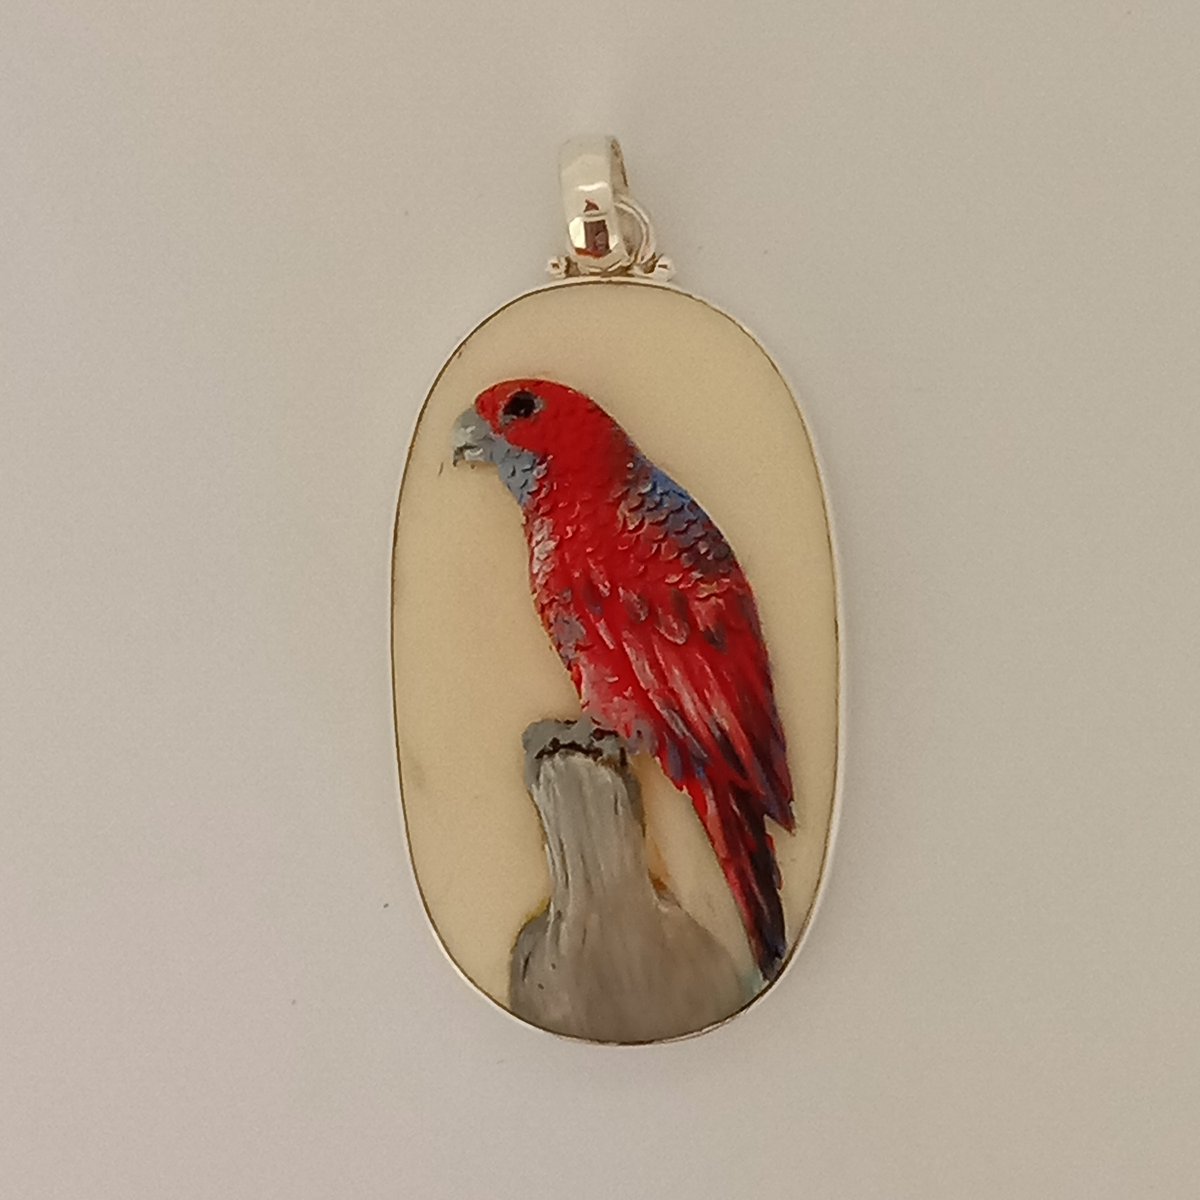 Bird Parrot Hand Painted Pendant 925 Sterling Silver Carved Buffalo Bone Necklace Pendant Jewelry etsy.me/3evQJzP #silver #red #yes #men #parrotbird #birdanimal #pendantjewelry #necklacependant #sterlingsil